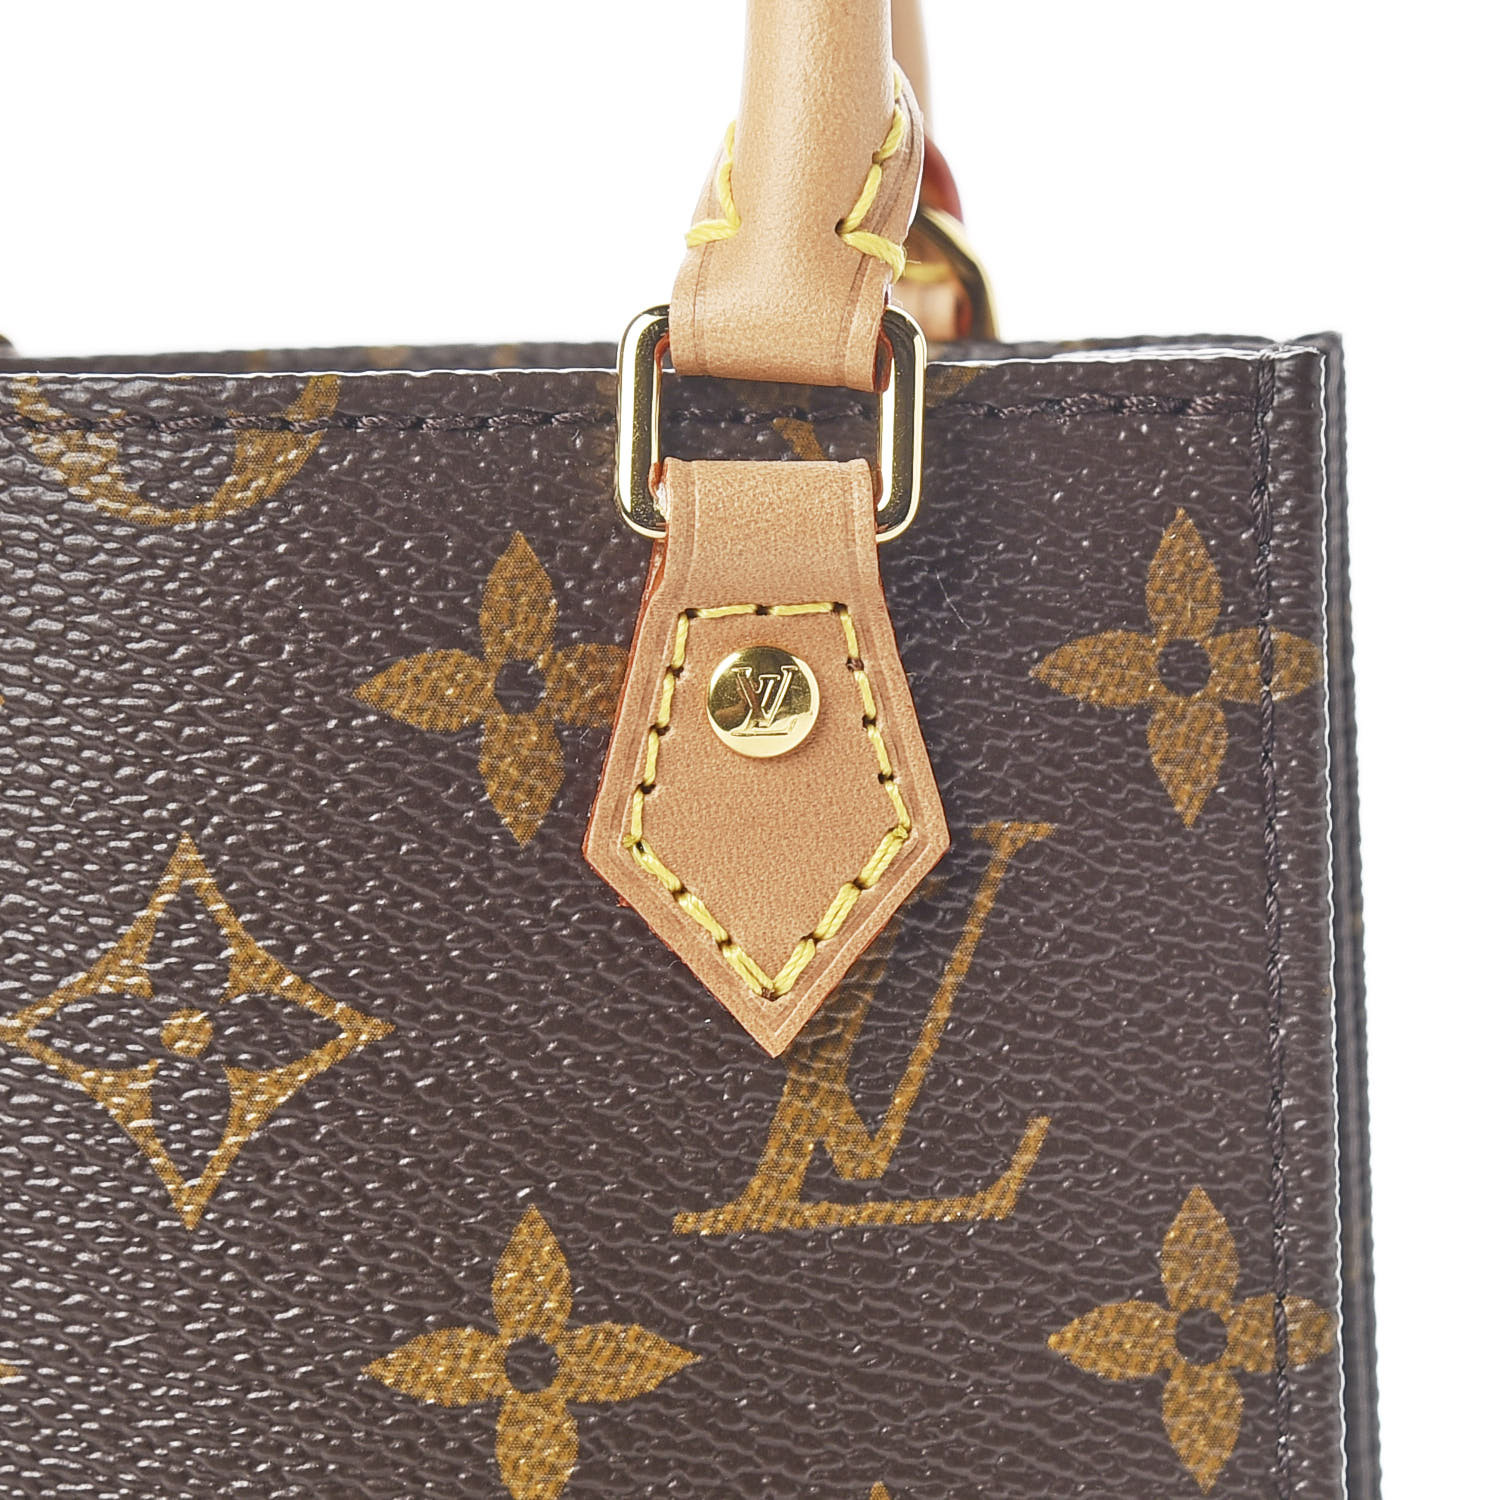 Petit Sac Plat Monogram Empreinte Leather - Wallets and Small Leather Goods